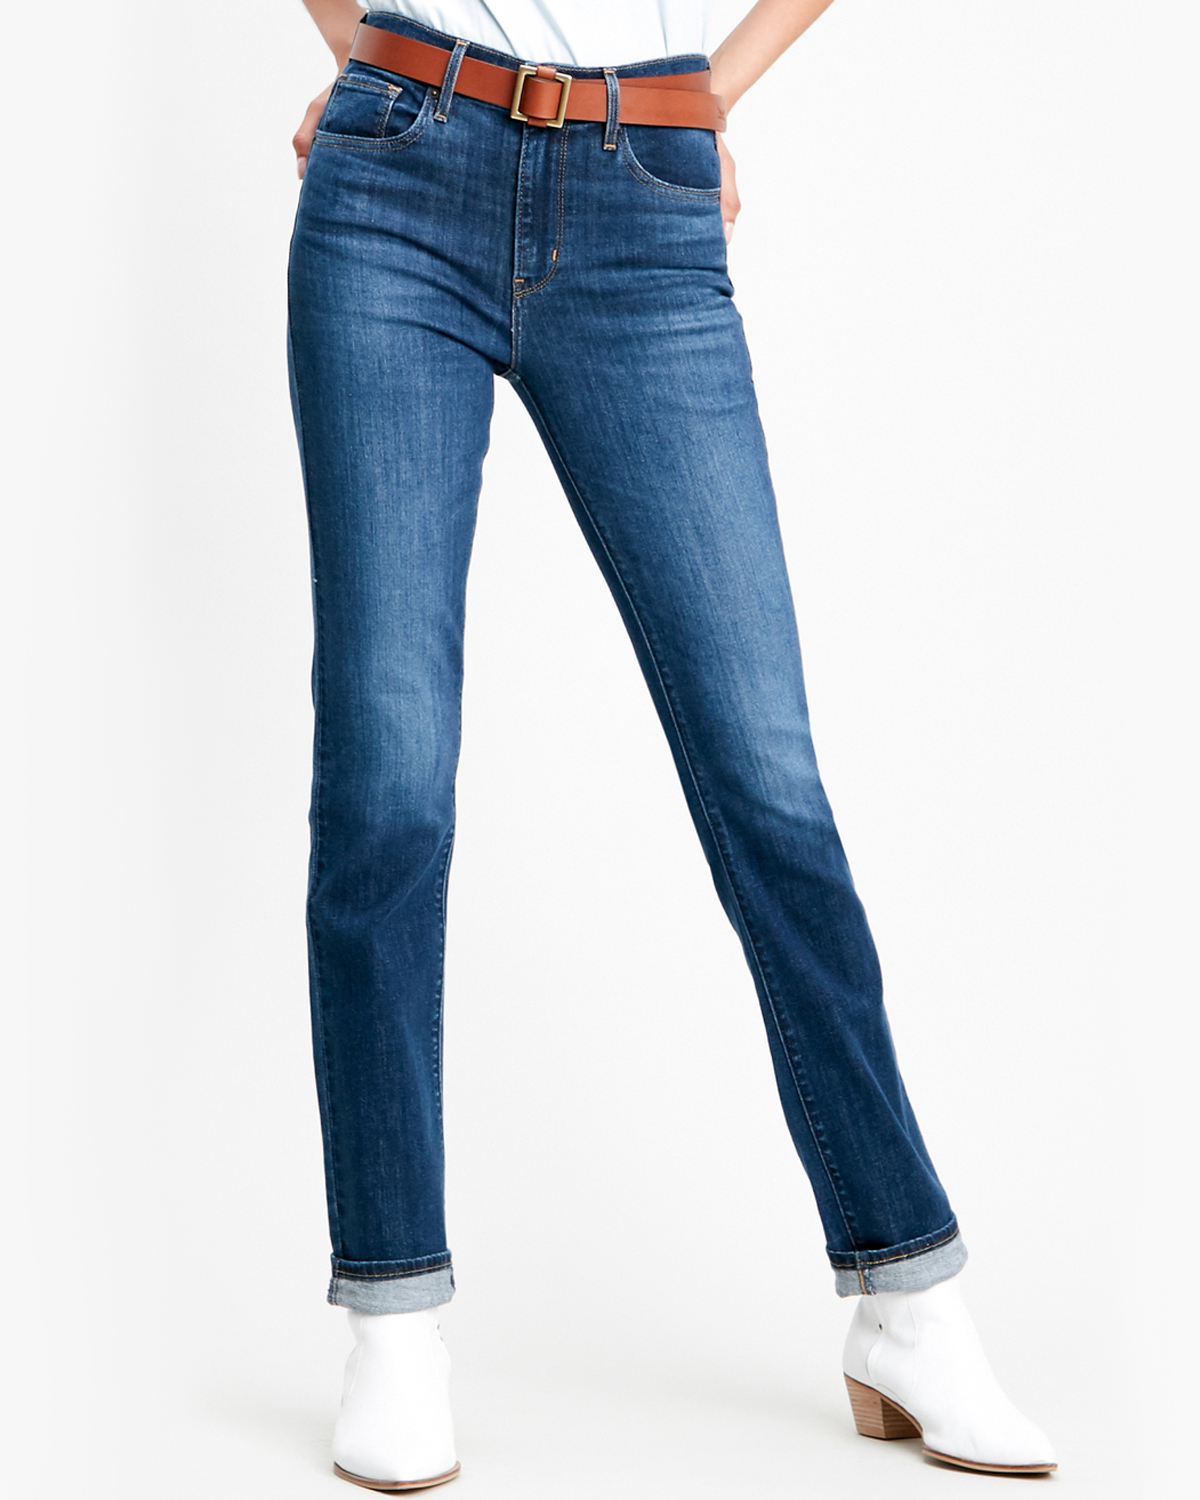 Levis 724 High Rise straight